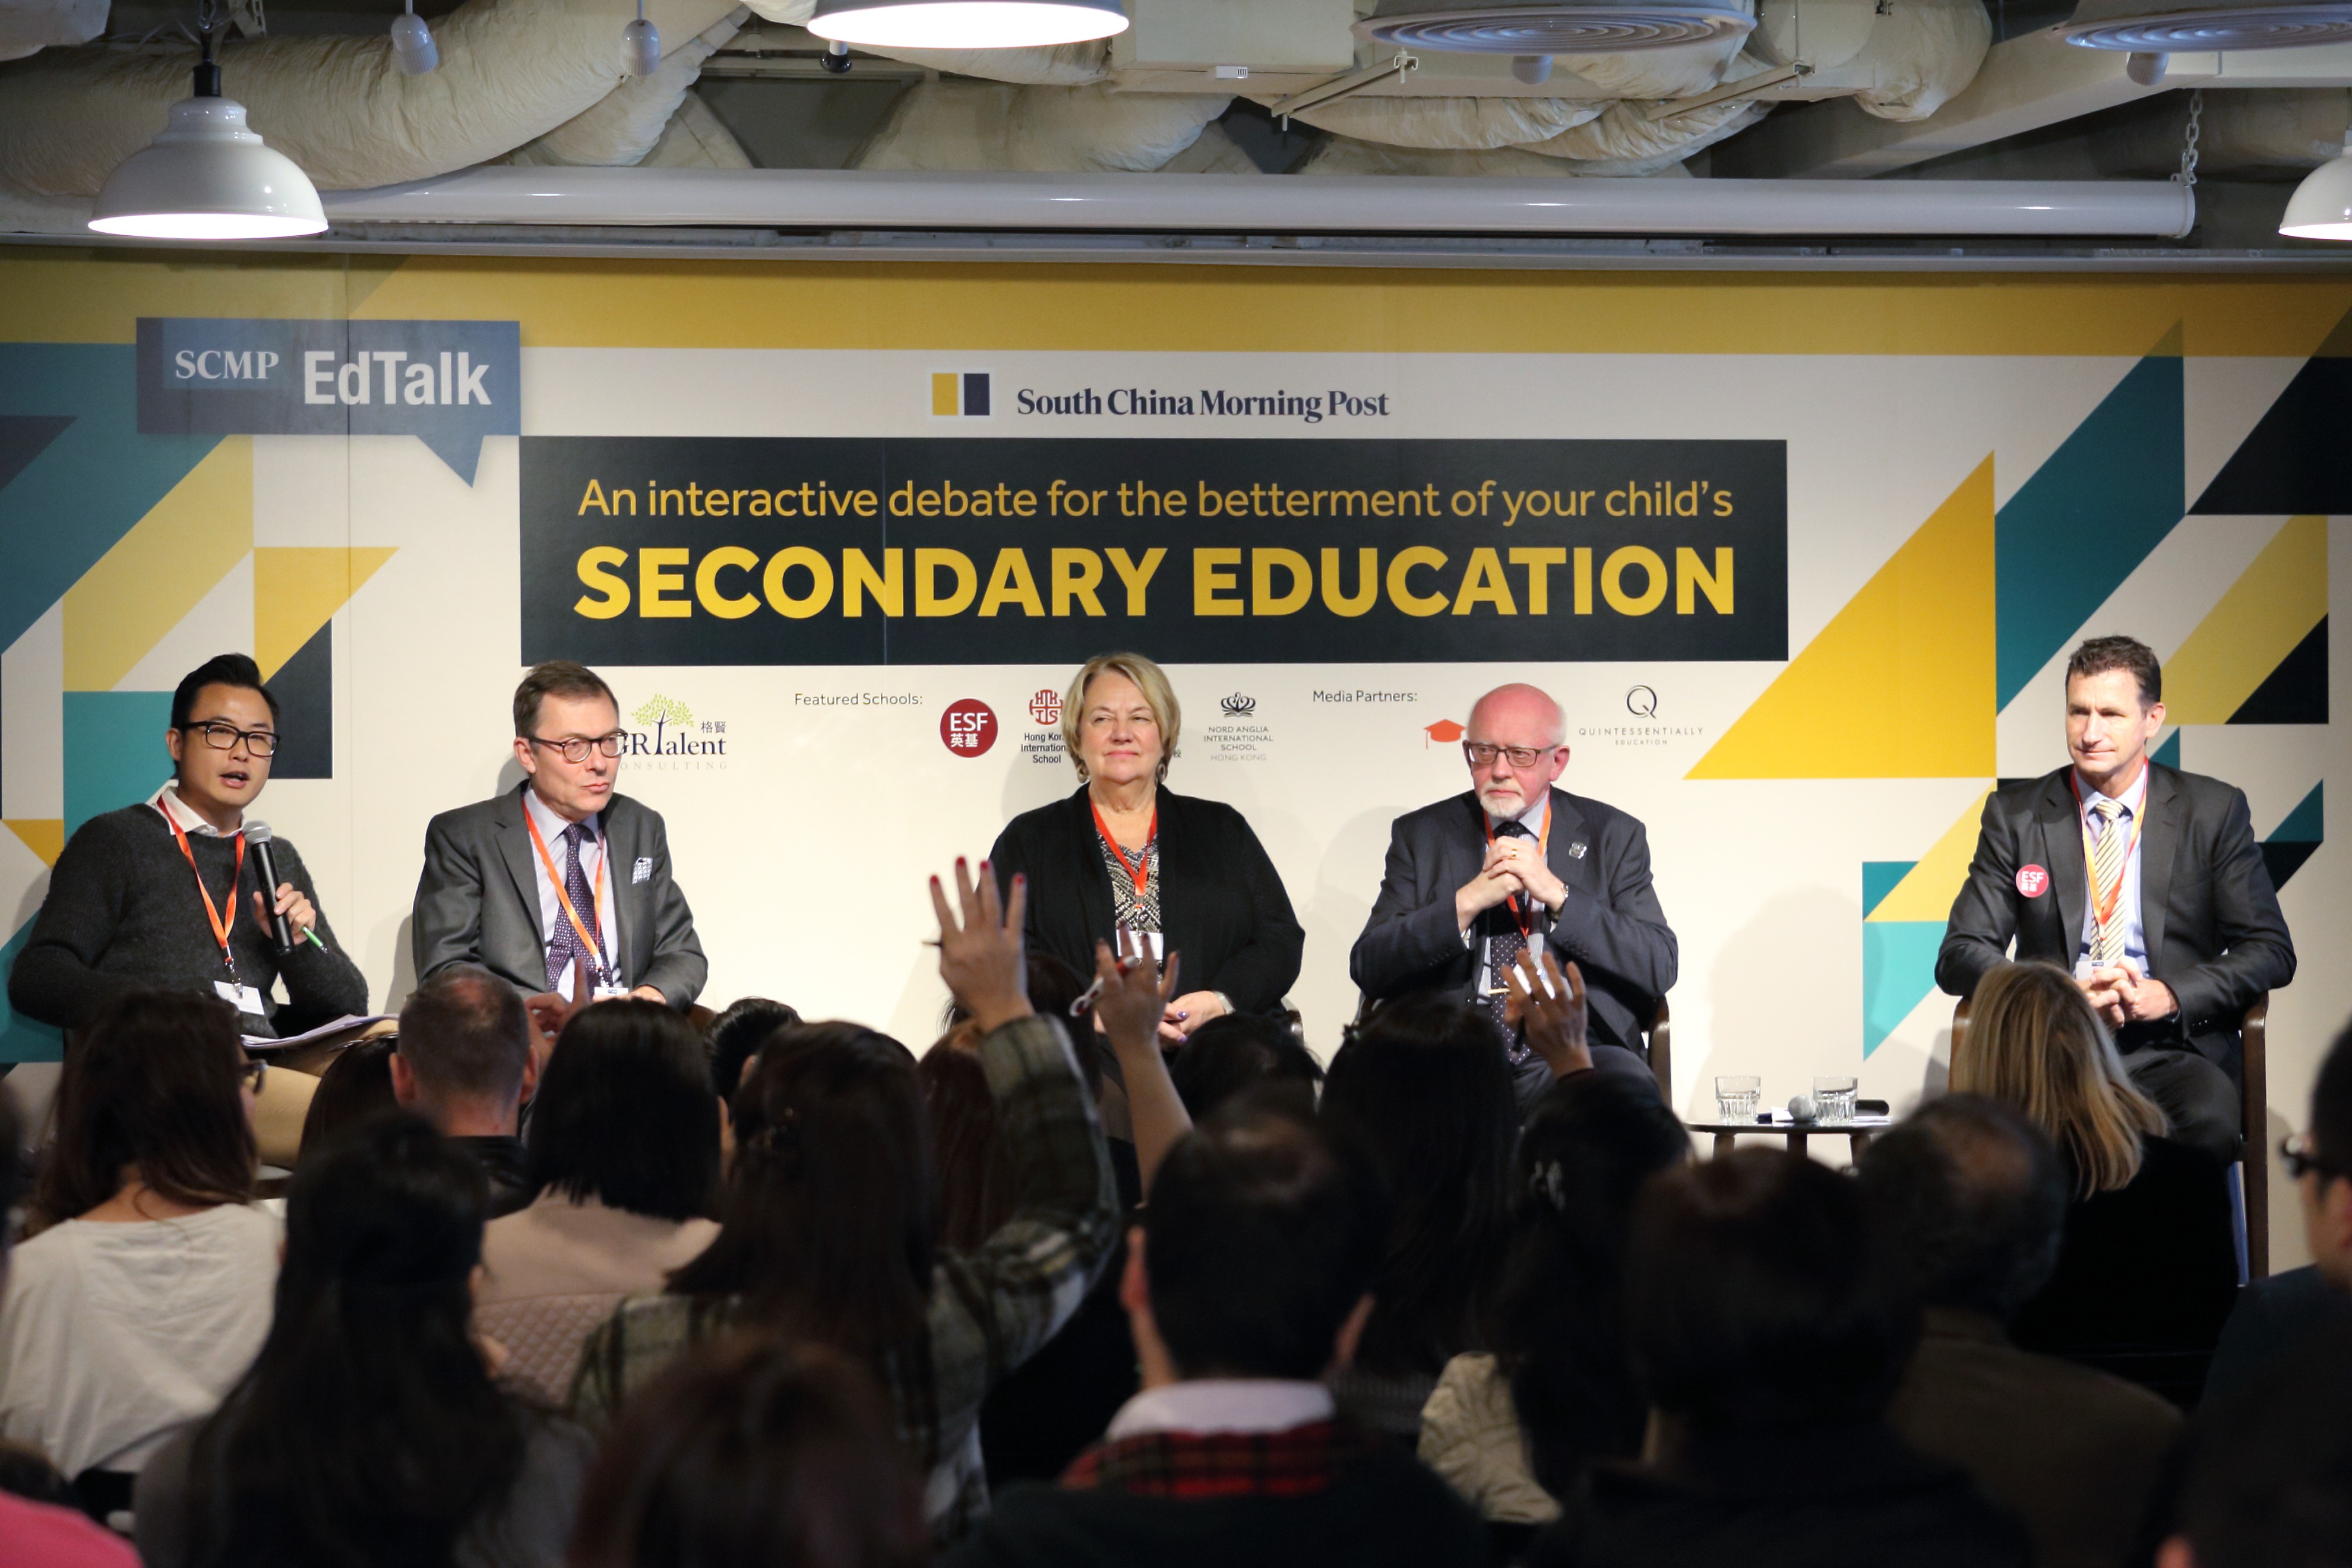 From left: Ginn Fung, SCMP Education Editor (moderator); Robin Lister, founding headmaster of Malvern College Hong Kong; Natalie Broderick, director of student services at Hong Kong International School; Brian Cooklin, principal of Nord Anglia International School; and Mark Blackshaw, principal at King George V.